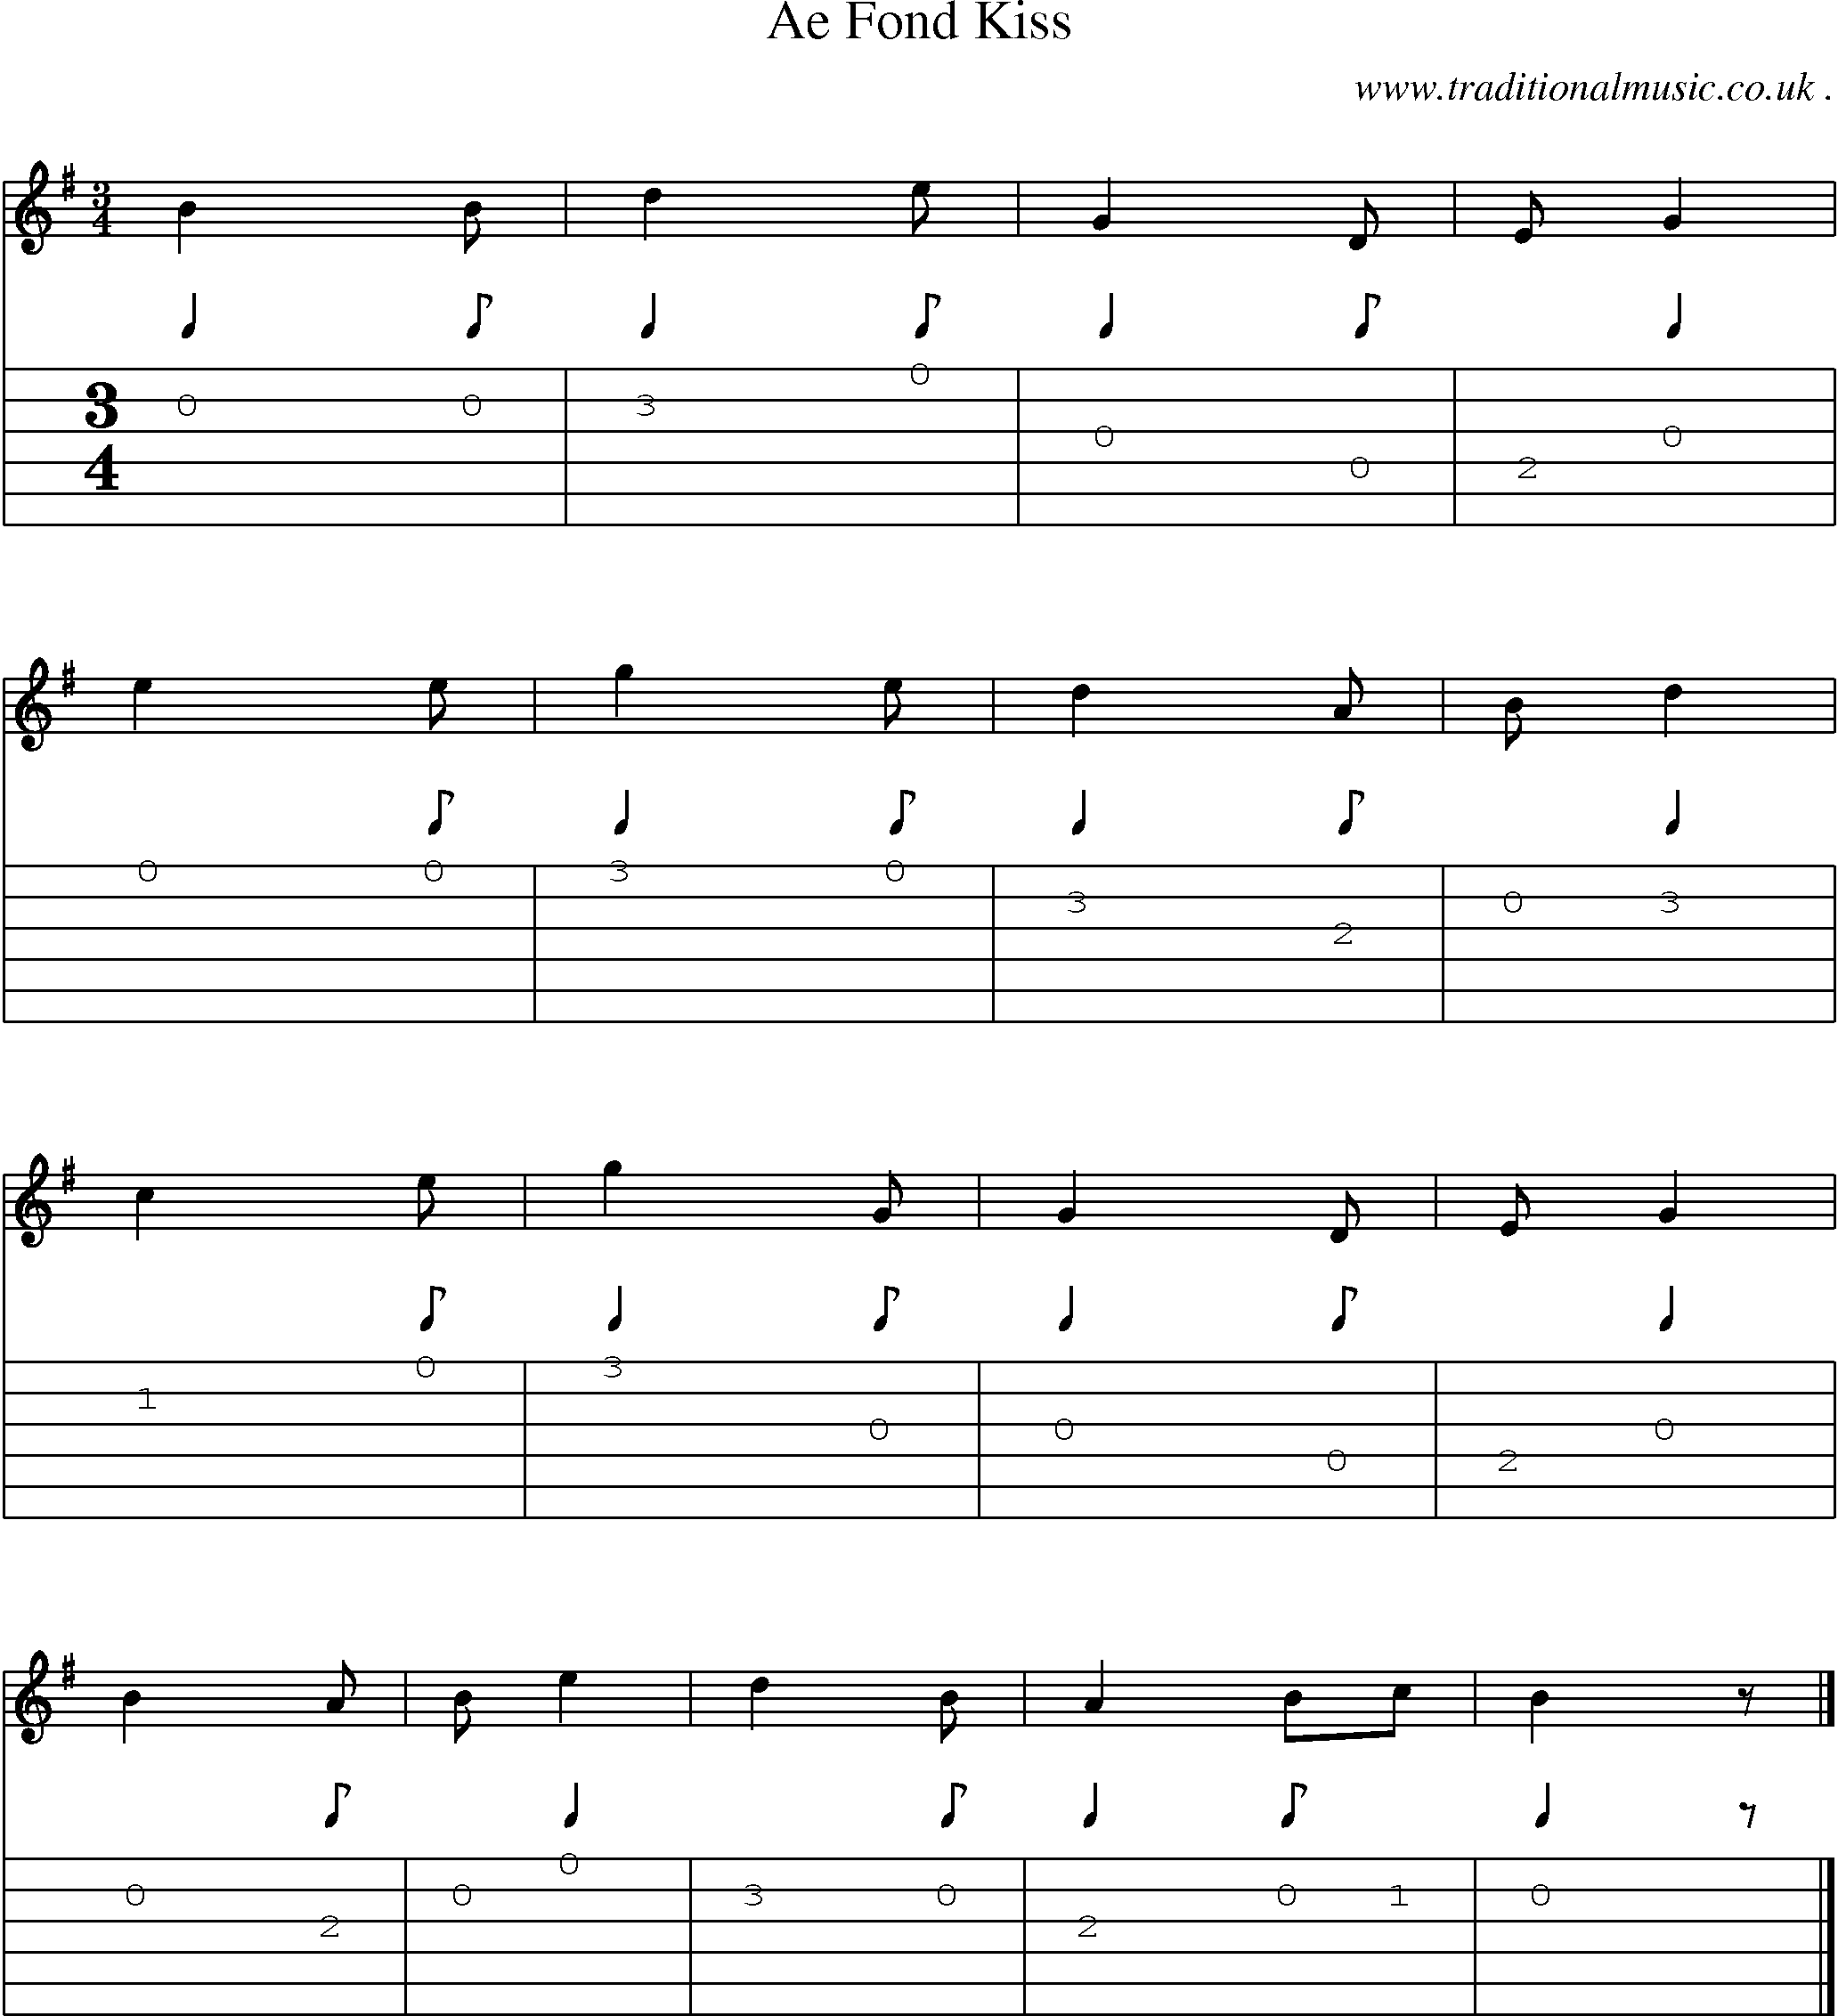 Sheet-music  score, Chords and Guitar Tabs for Ae Fond Kiss